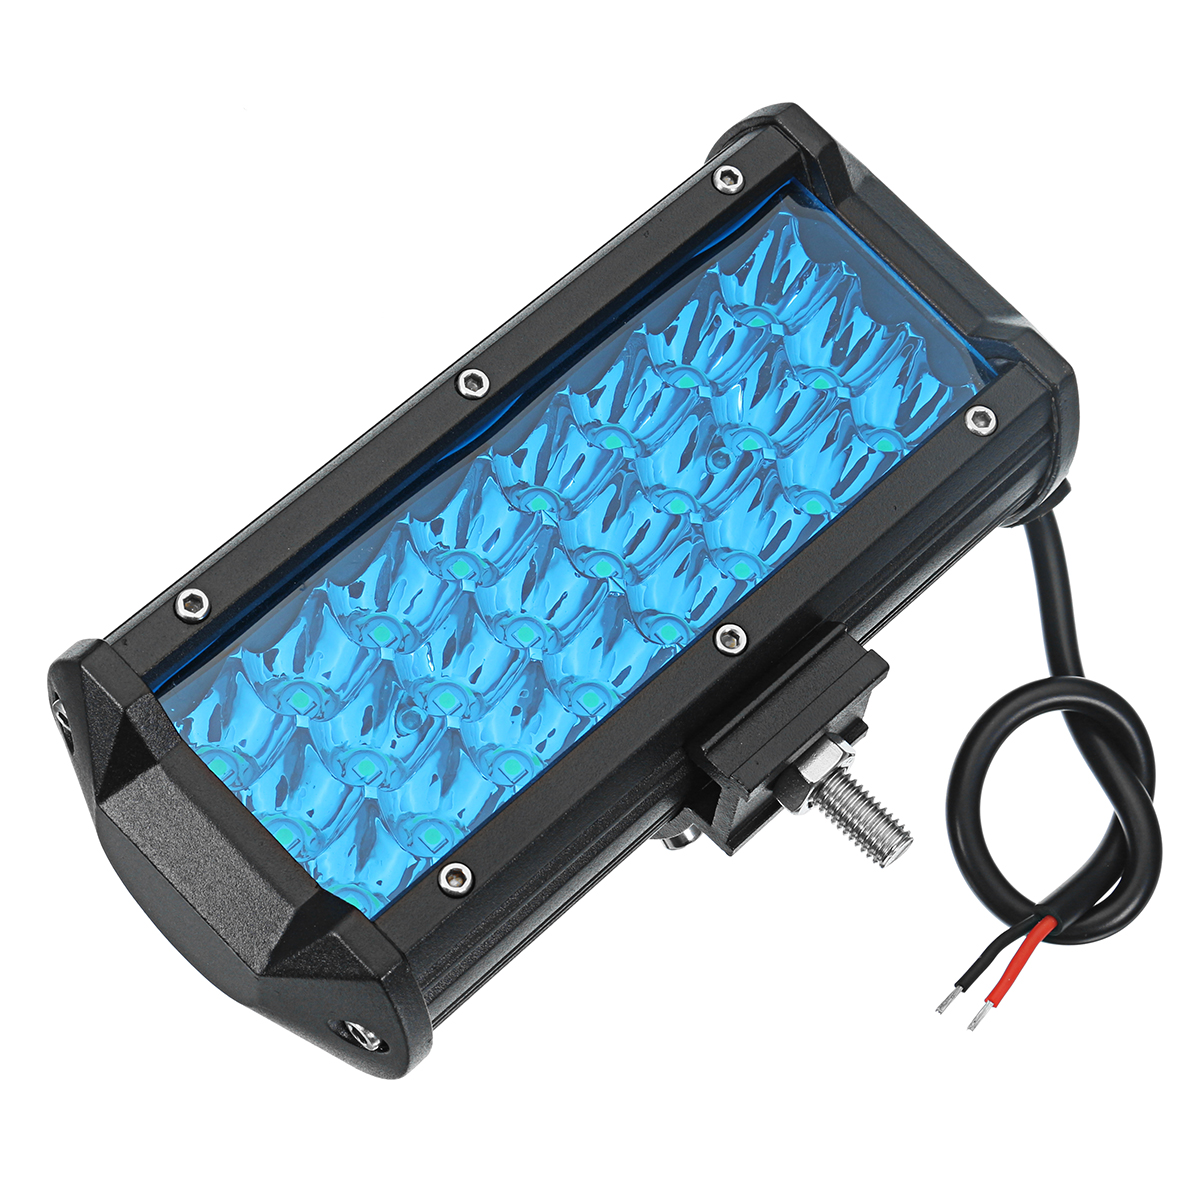 7 Inch 144W 24 LED Work Light Bar Spot Beam Car Driving Lamp for off Road SUV Truck